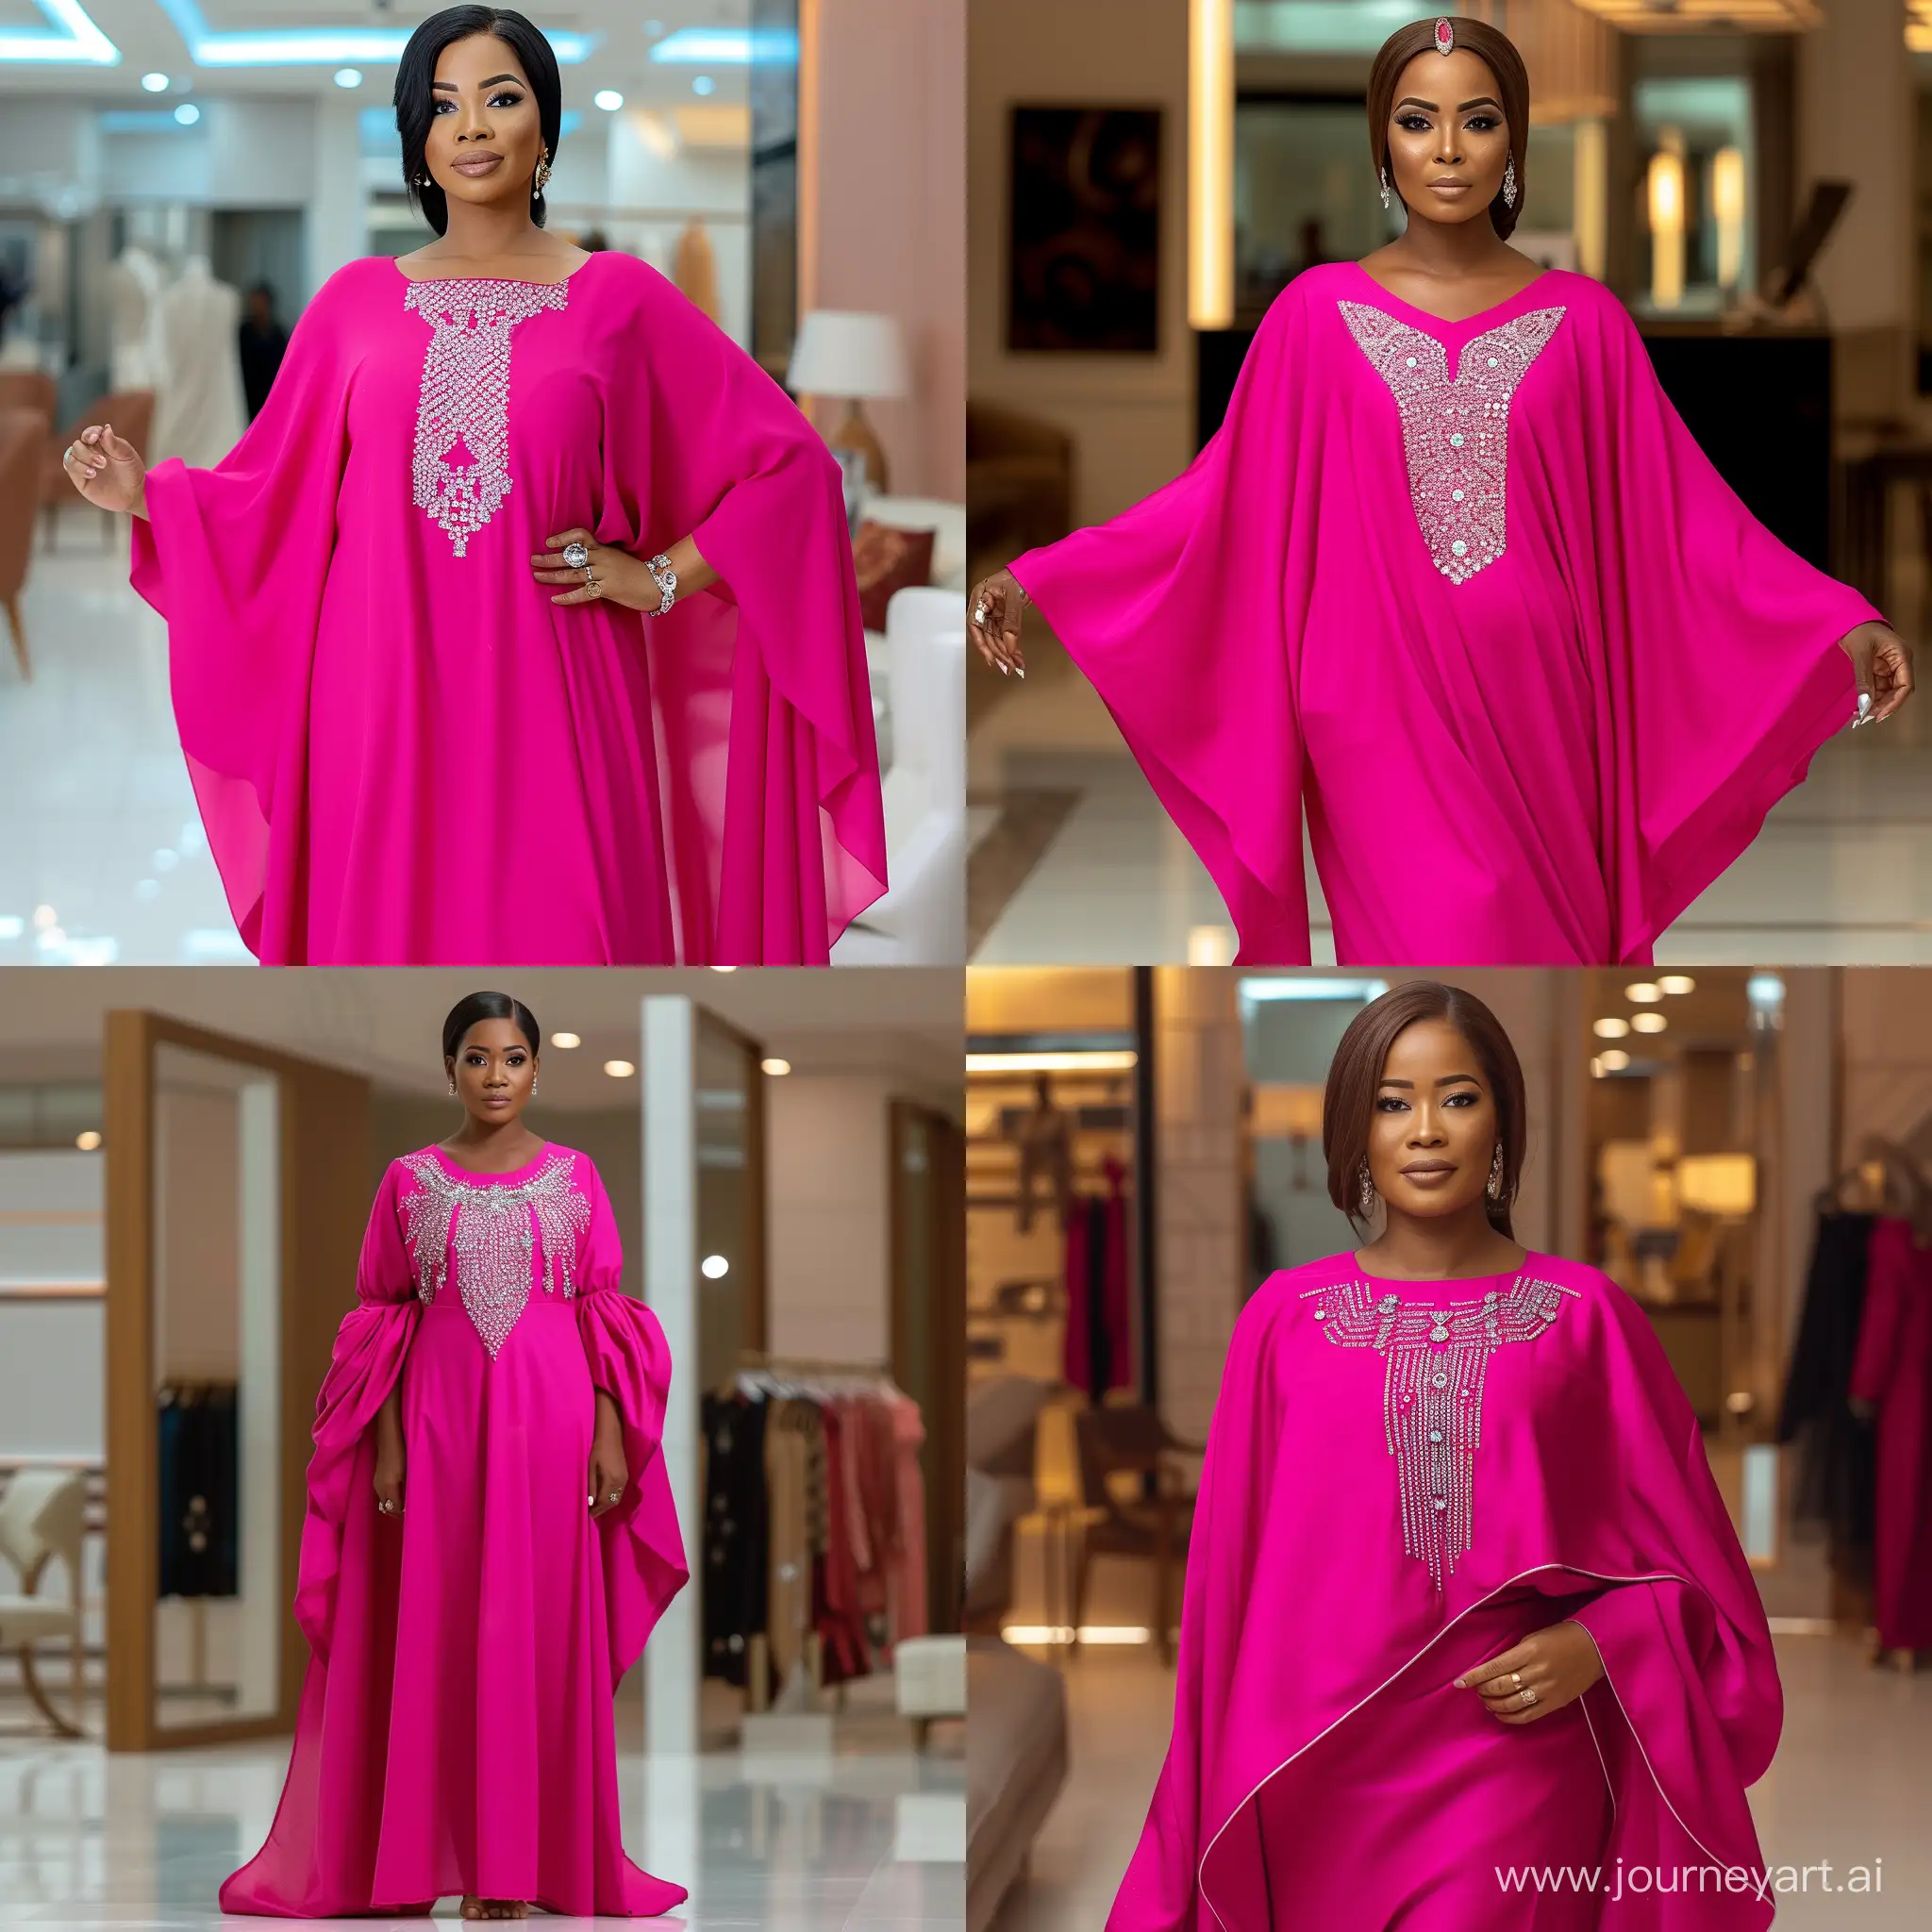 Create an image of a Nigerian woman with a medium build, dressed in a traditional Boubou garment in a bright fuchsia. The Boubou is tailored from smooth, lightweight crepe with wide, flowing sleeves. It features elegant silver and fuchsia diamond embellishments on the front. Her hair is styled in a simple, refined manner. The setting is a showroom, showcasing her poise and the rich cultural heritage of her traditional dress.